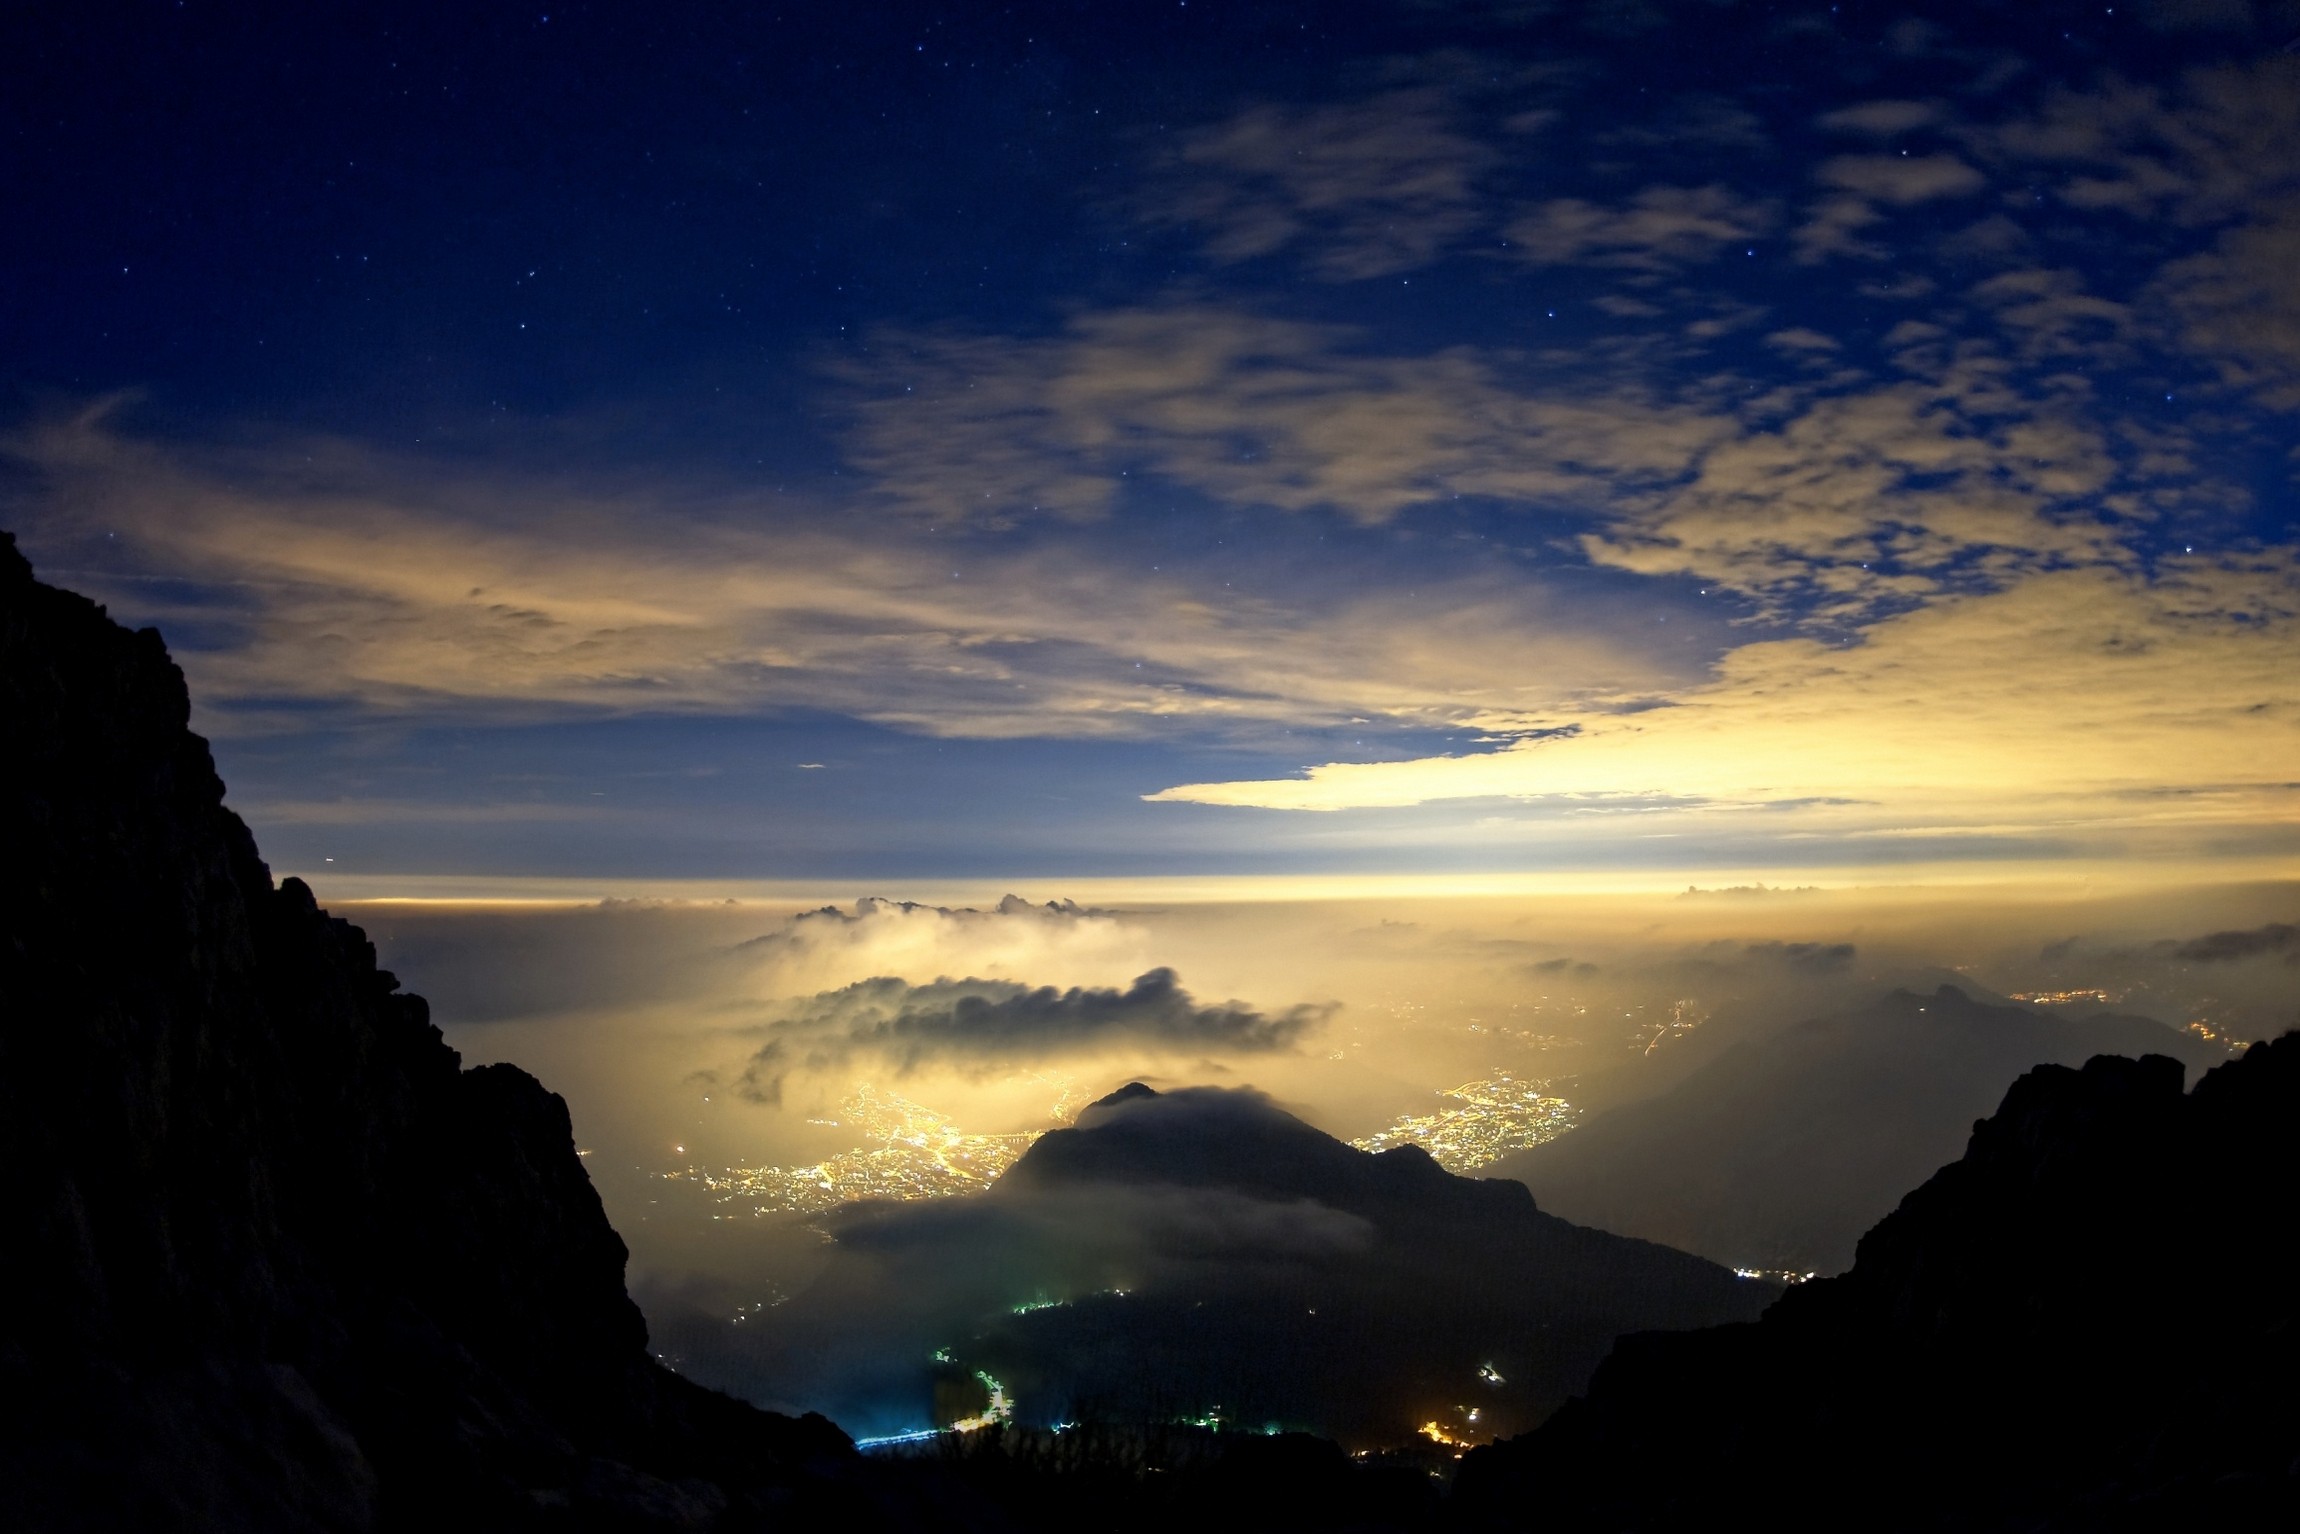 General 2300x1534 landscape nature mist valley evening stars sky clouds city lights mountains Italy